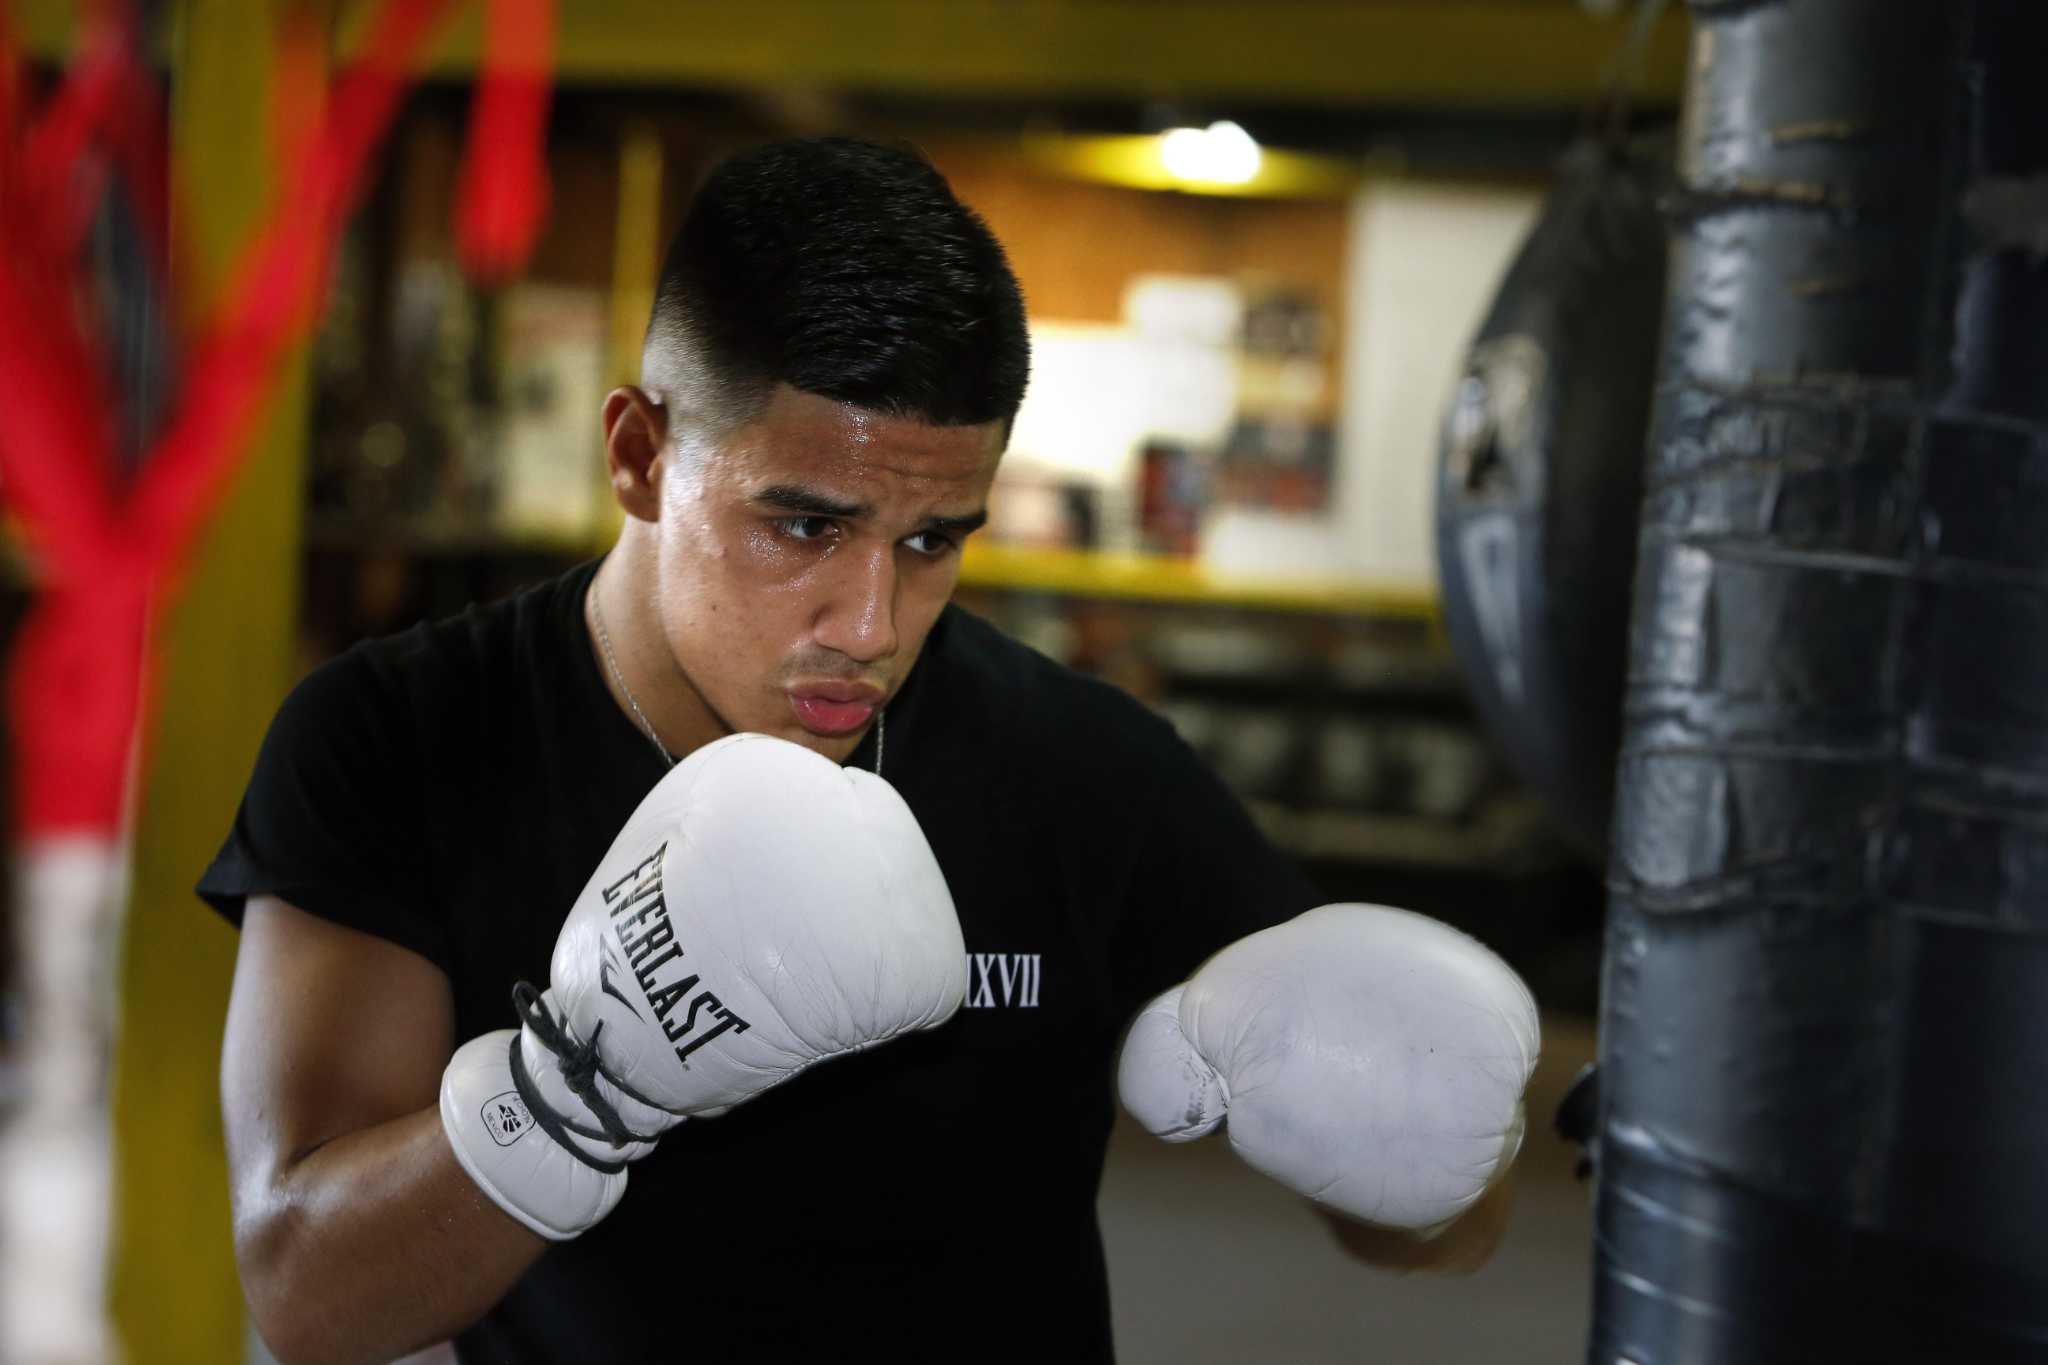 Boxing Medina, Bam present a 1-2 punch for fans on June 25 card